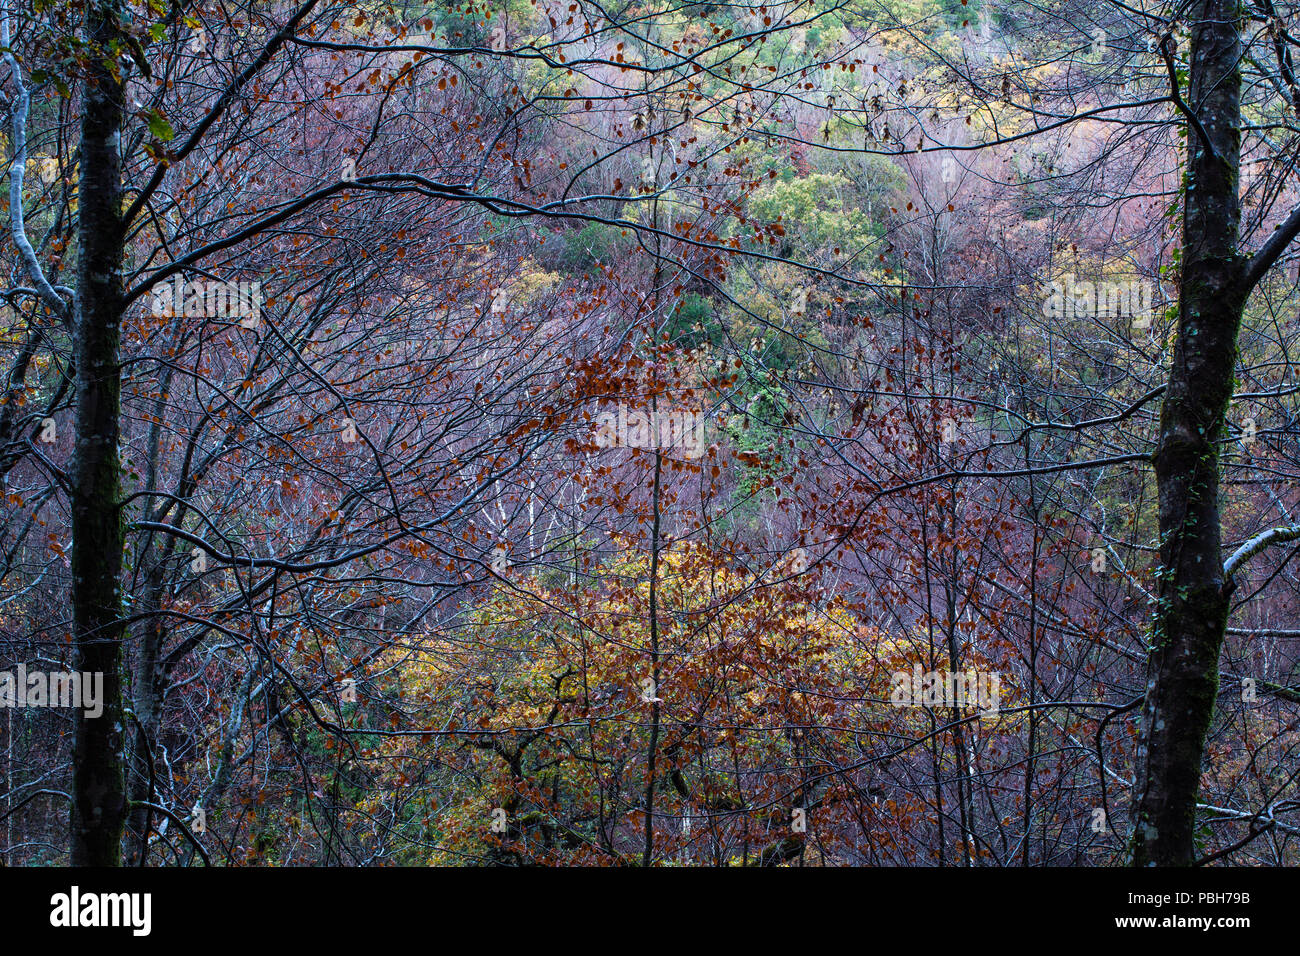 Autumn colours of the trees in the Mata da Albergaria national forest. Peneda-Geres National Park. Stock Photo